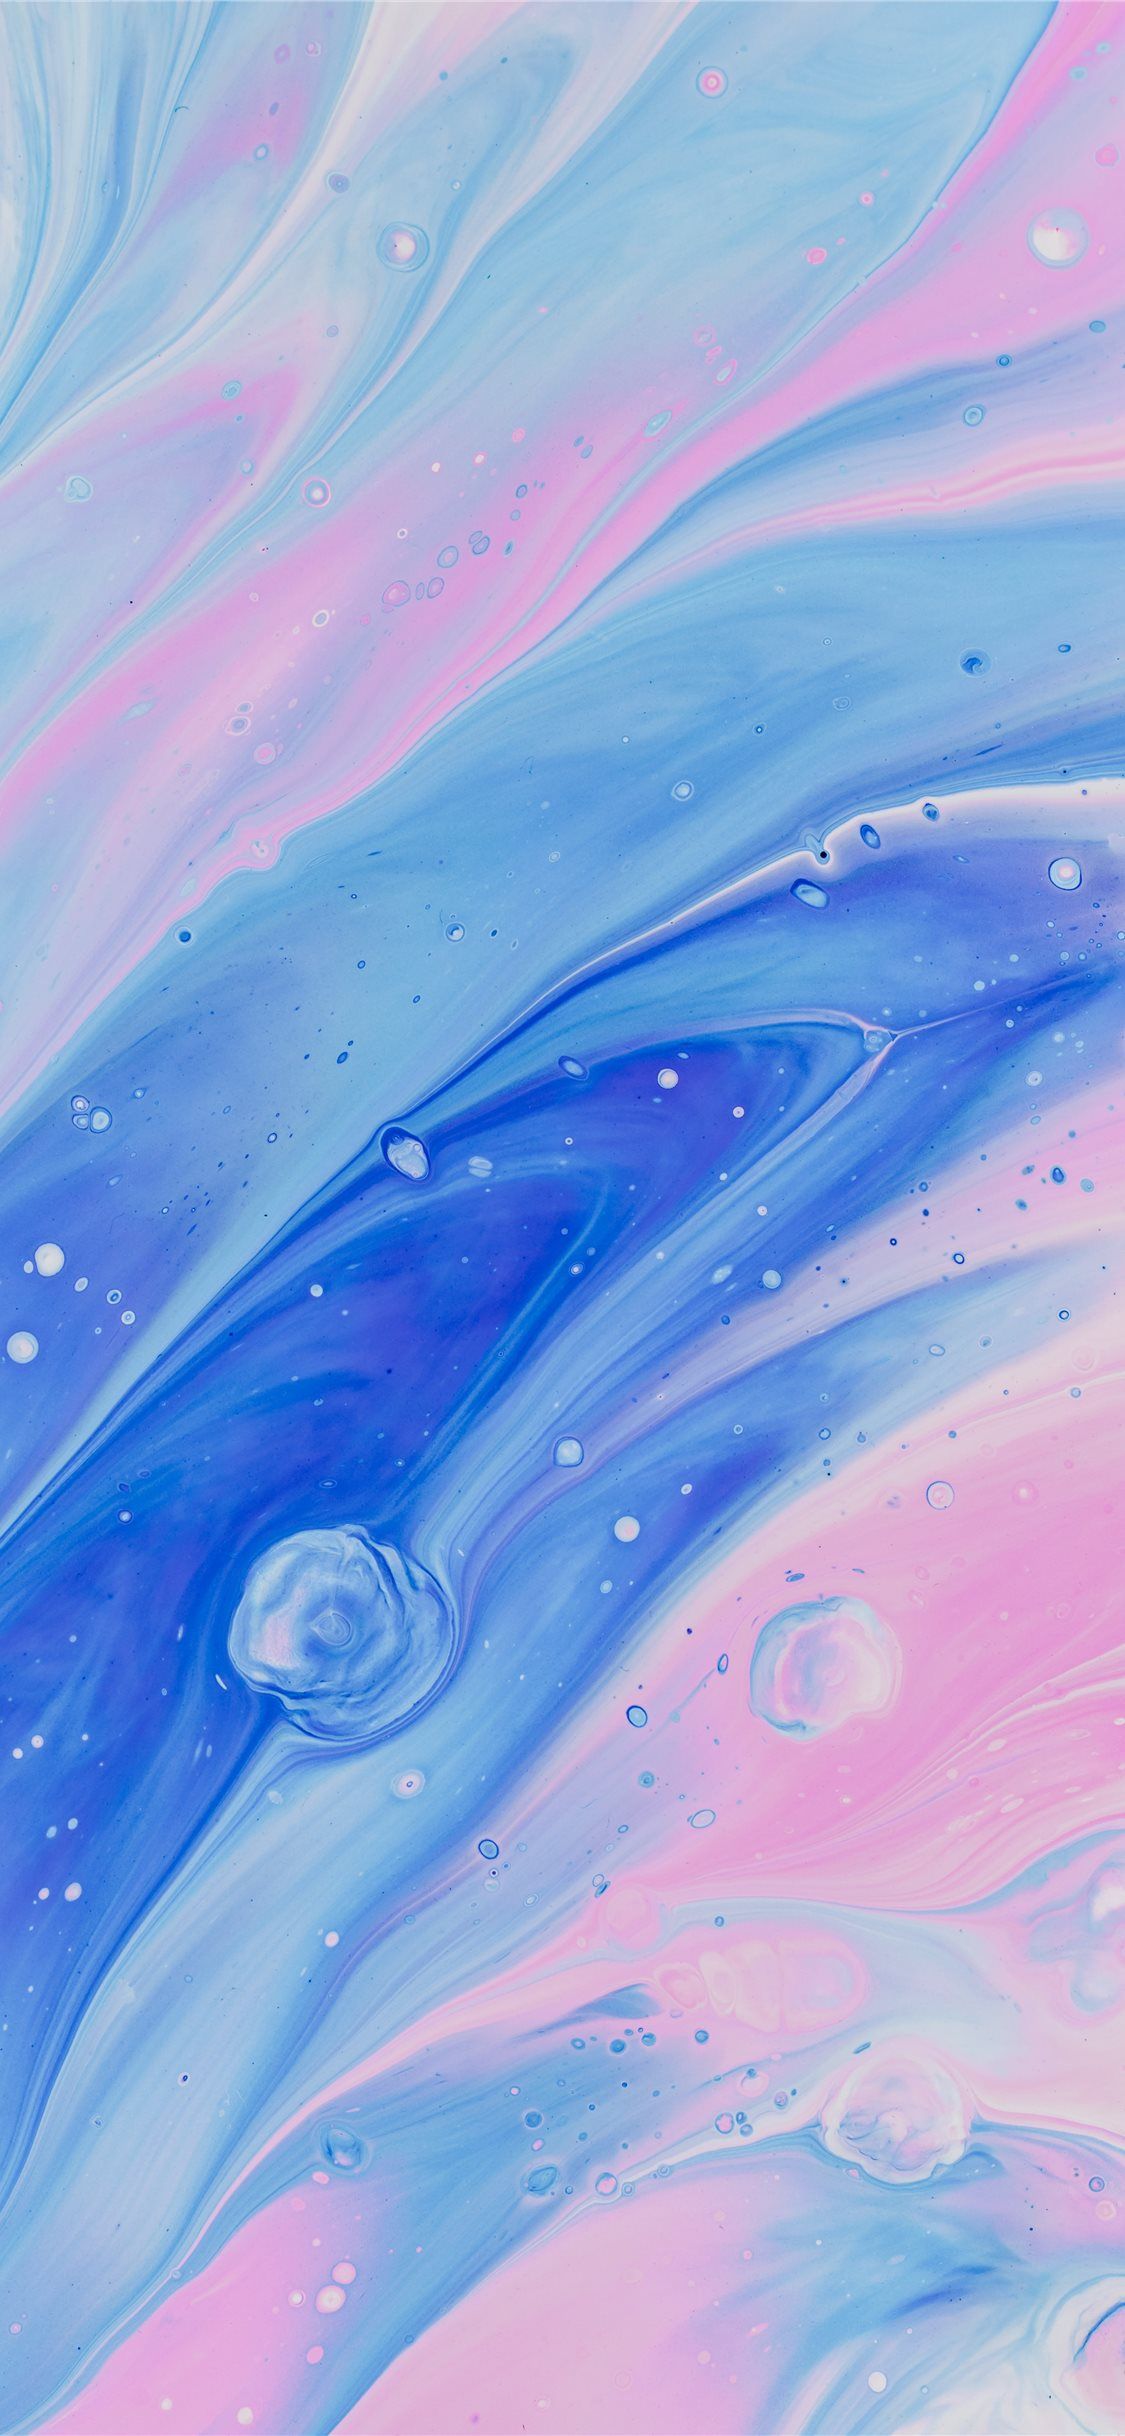 blue and pin abstract painting iPhone Wallpaper Free Download